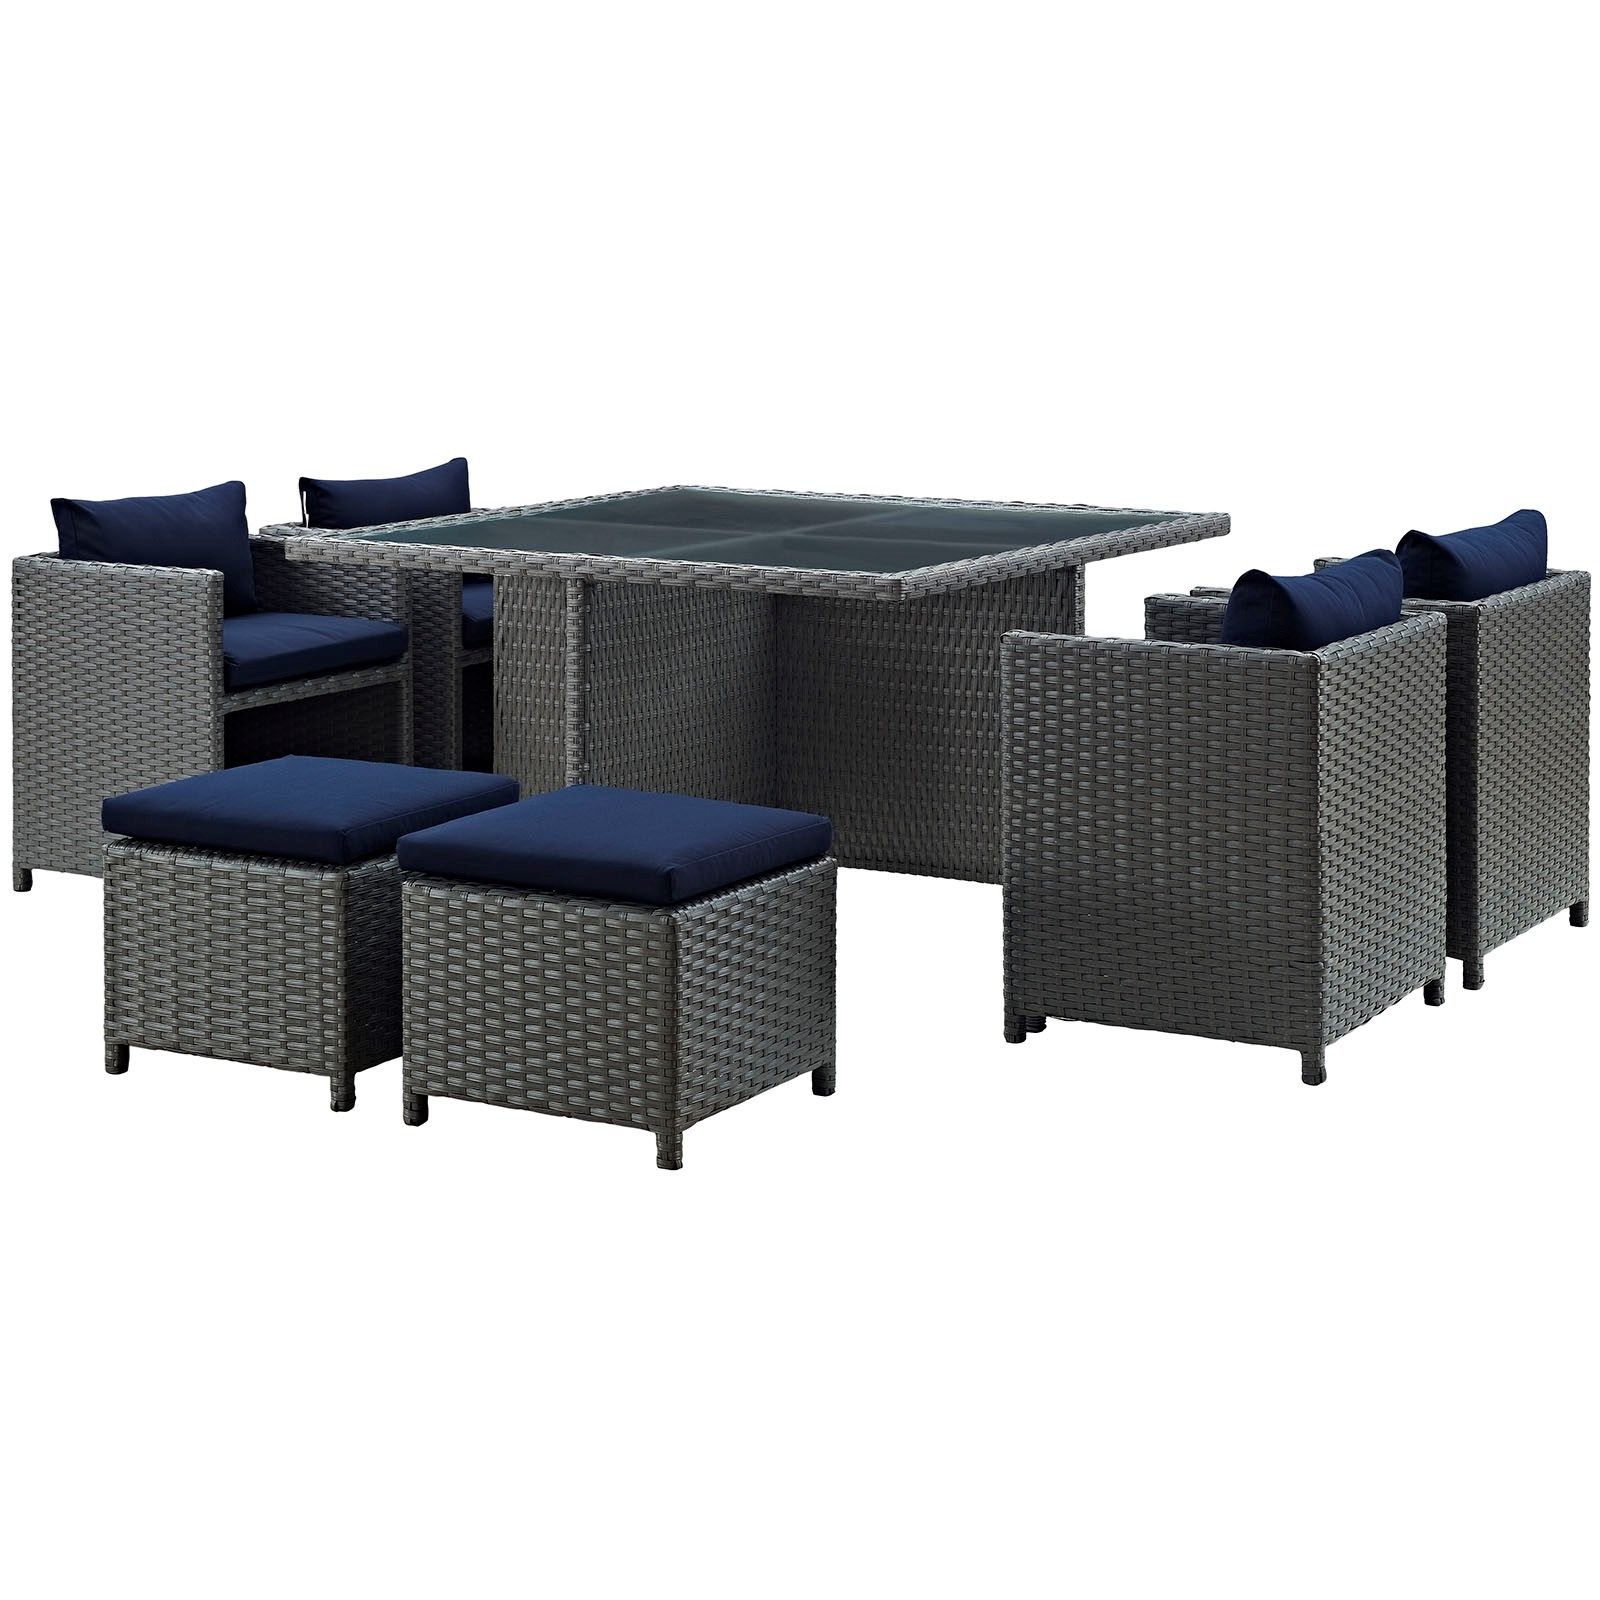 Best And Newest Sojourn 9 Piece Outdoor Patio Sunbrella® Dining Set In Canvas Navy In Navy Outdoor Seating Sets (View 8 of 15)